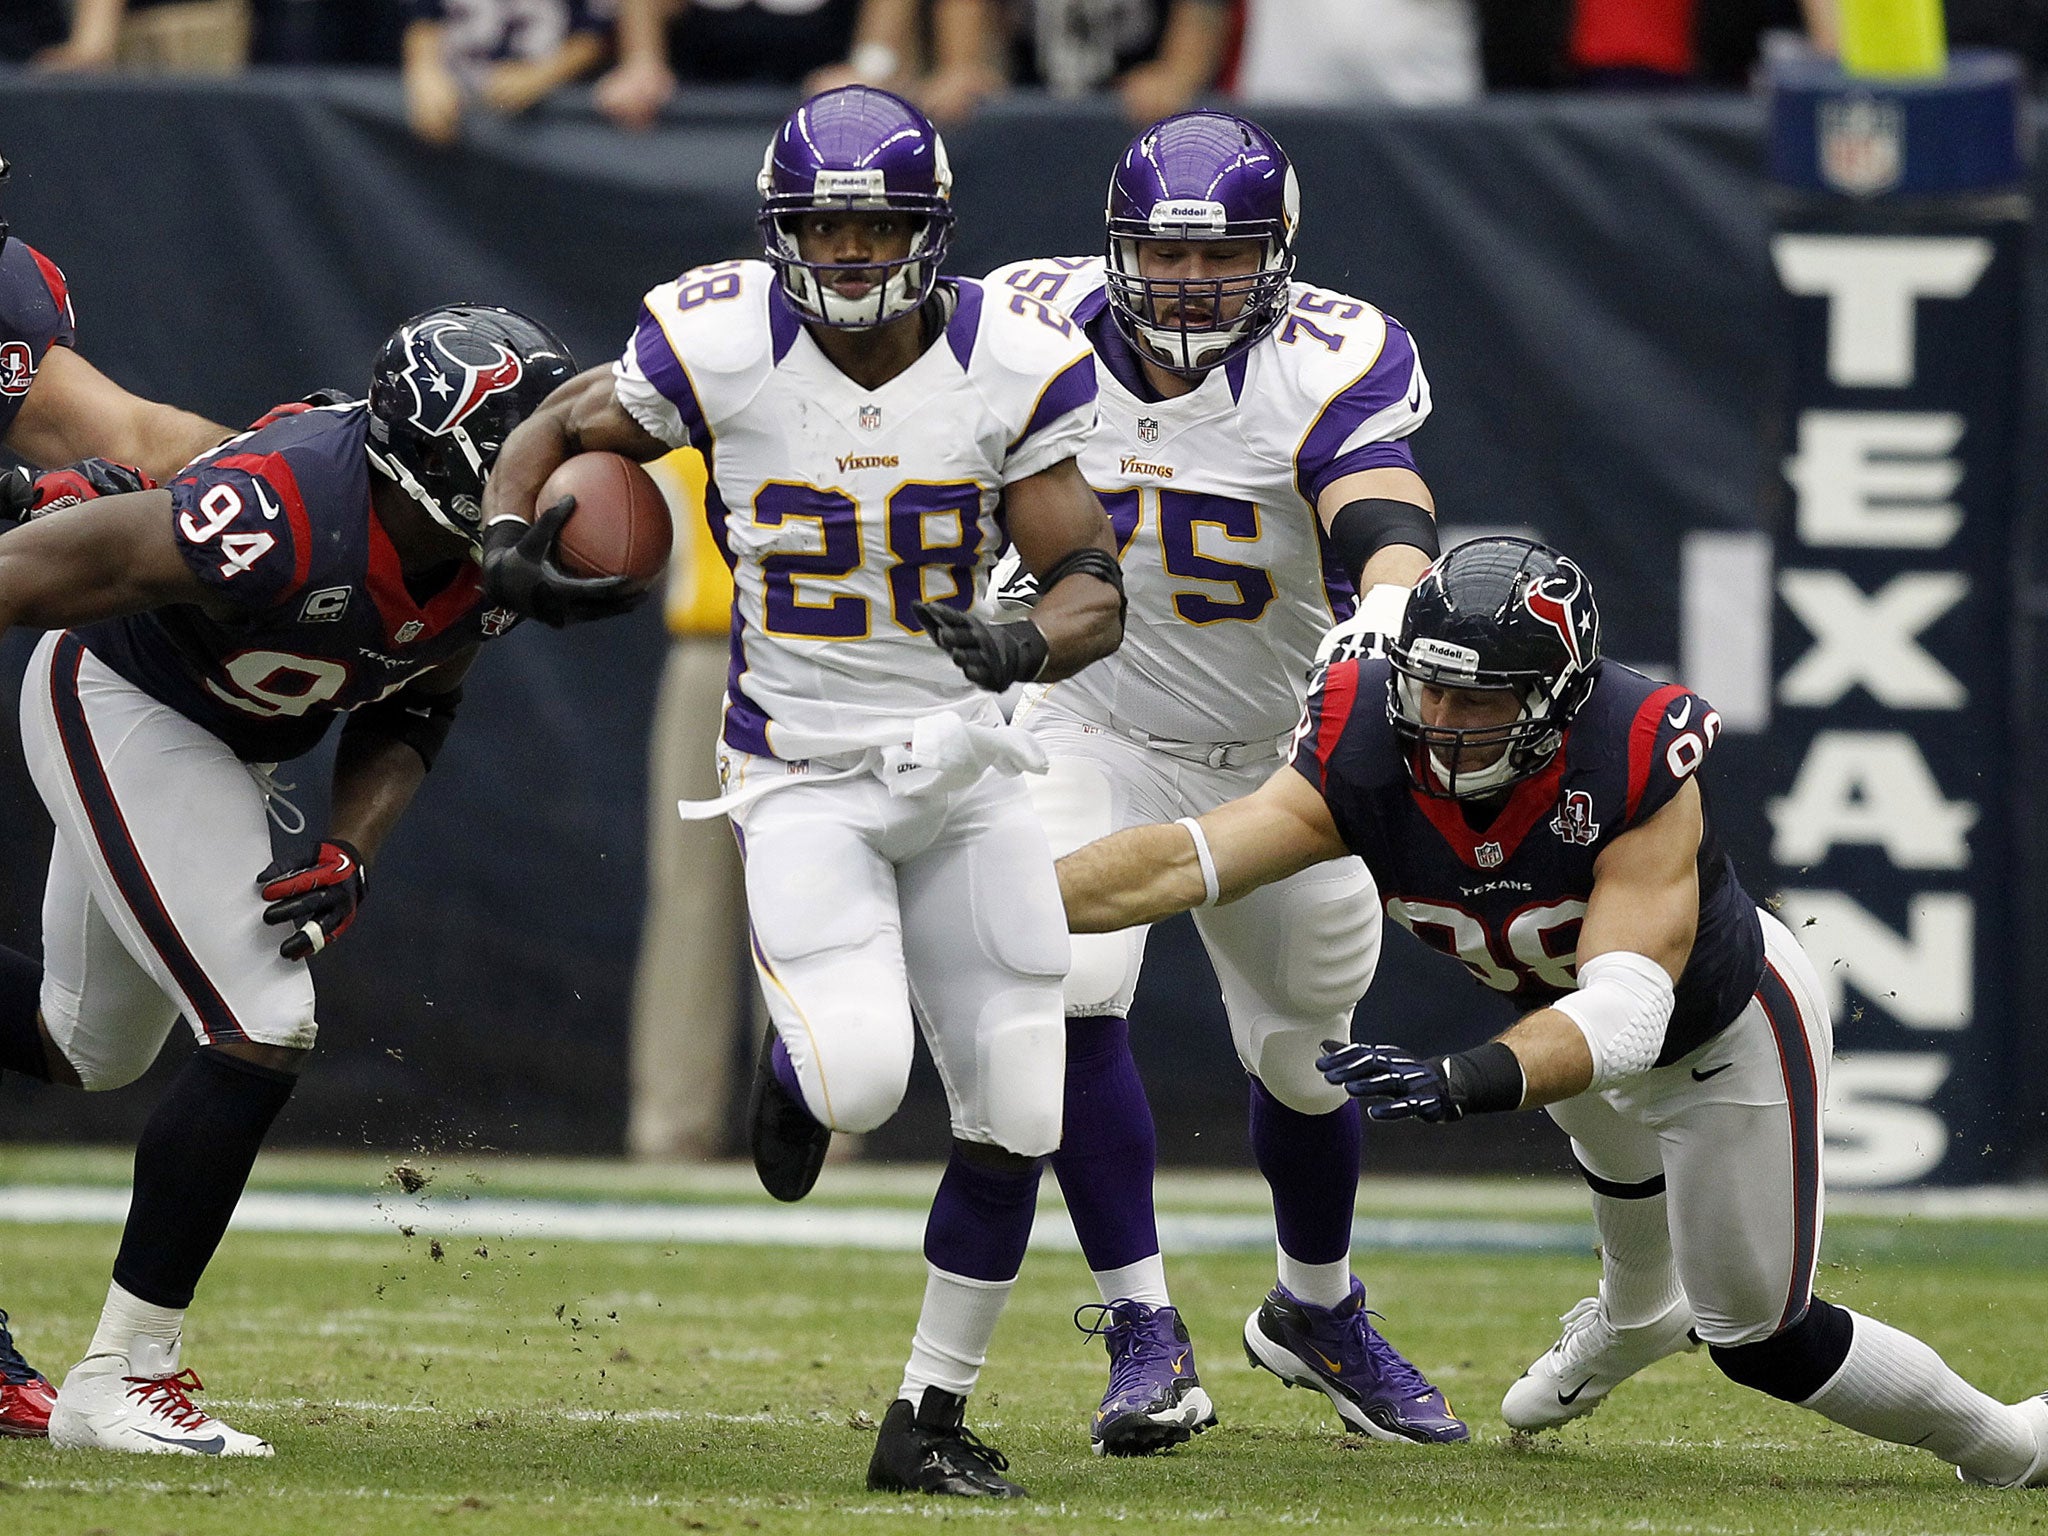 Adrian Peterson shows the running style that has made him the NFL's MVP